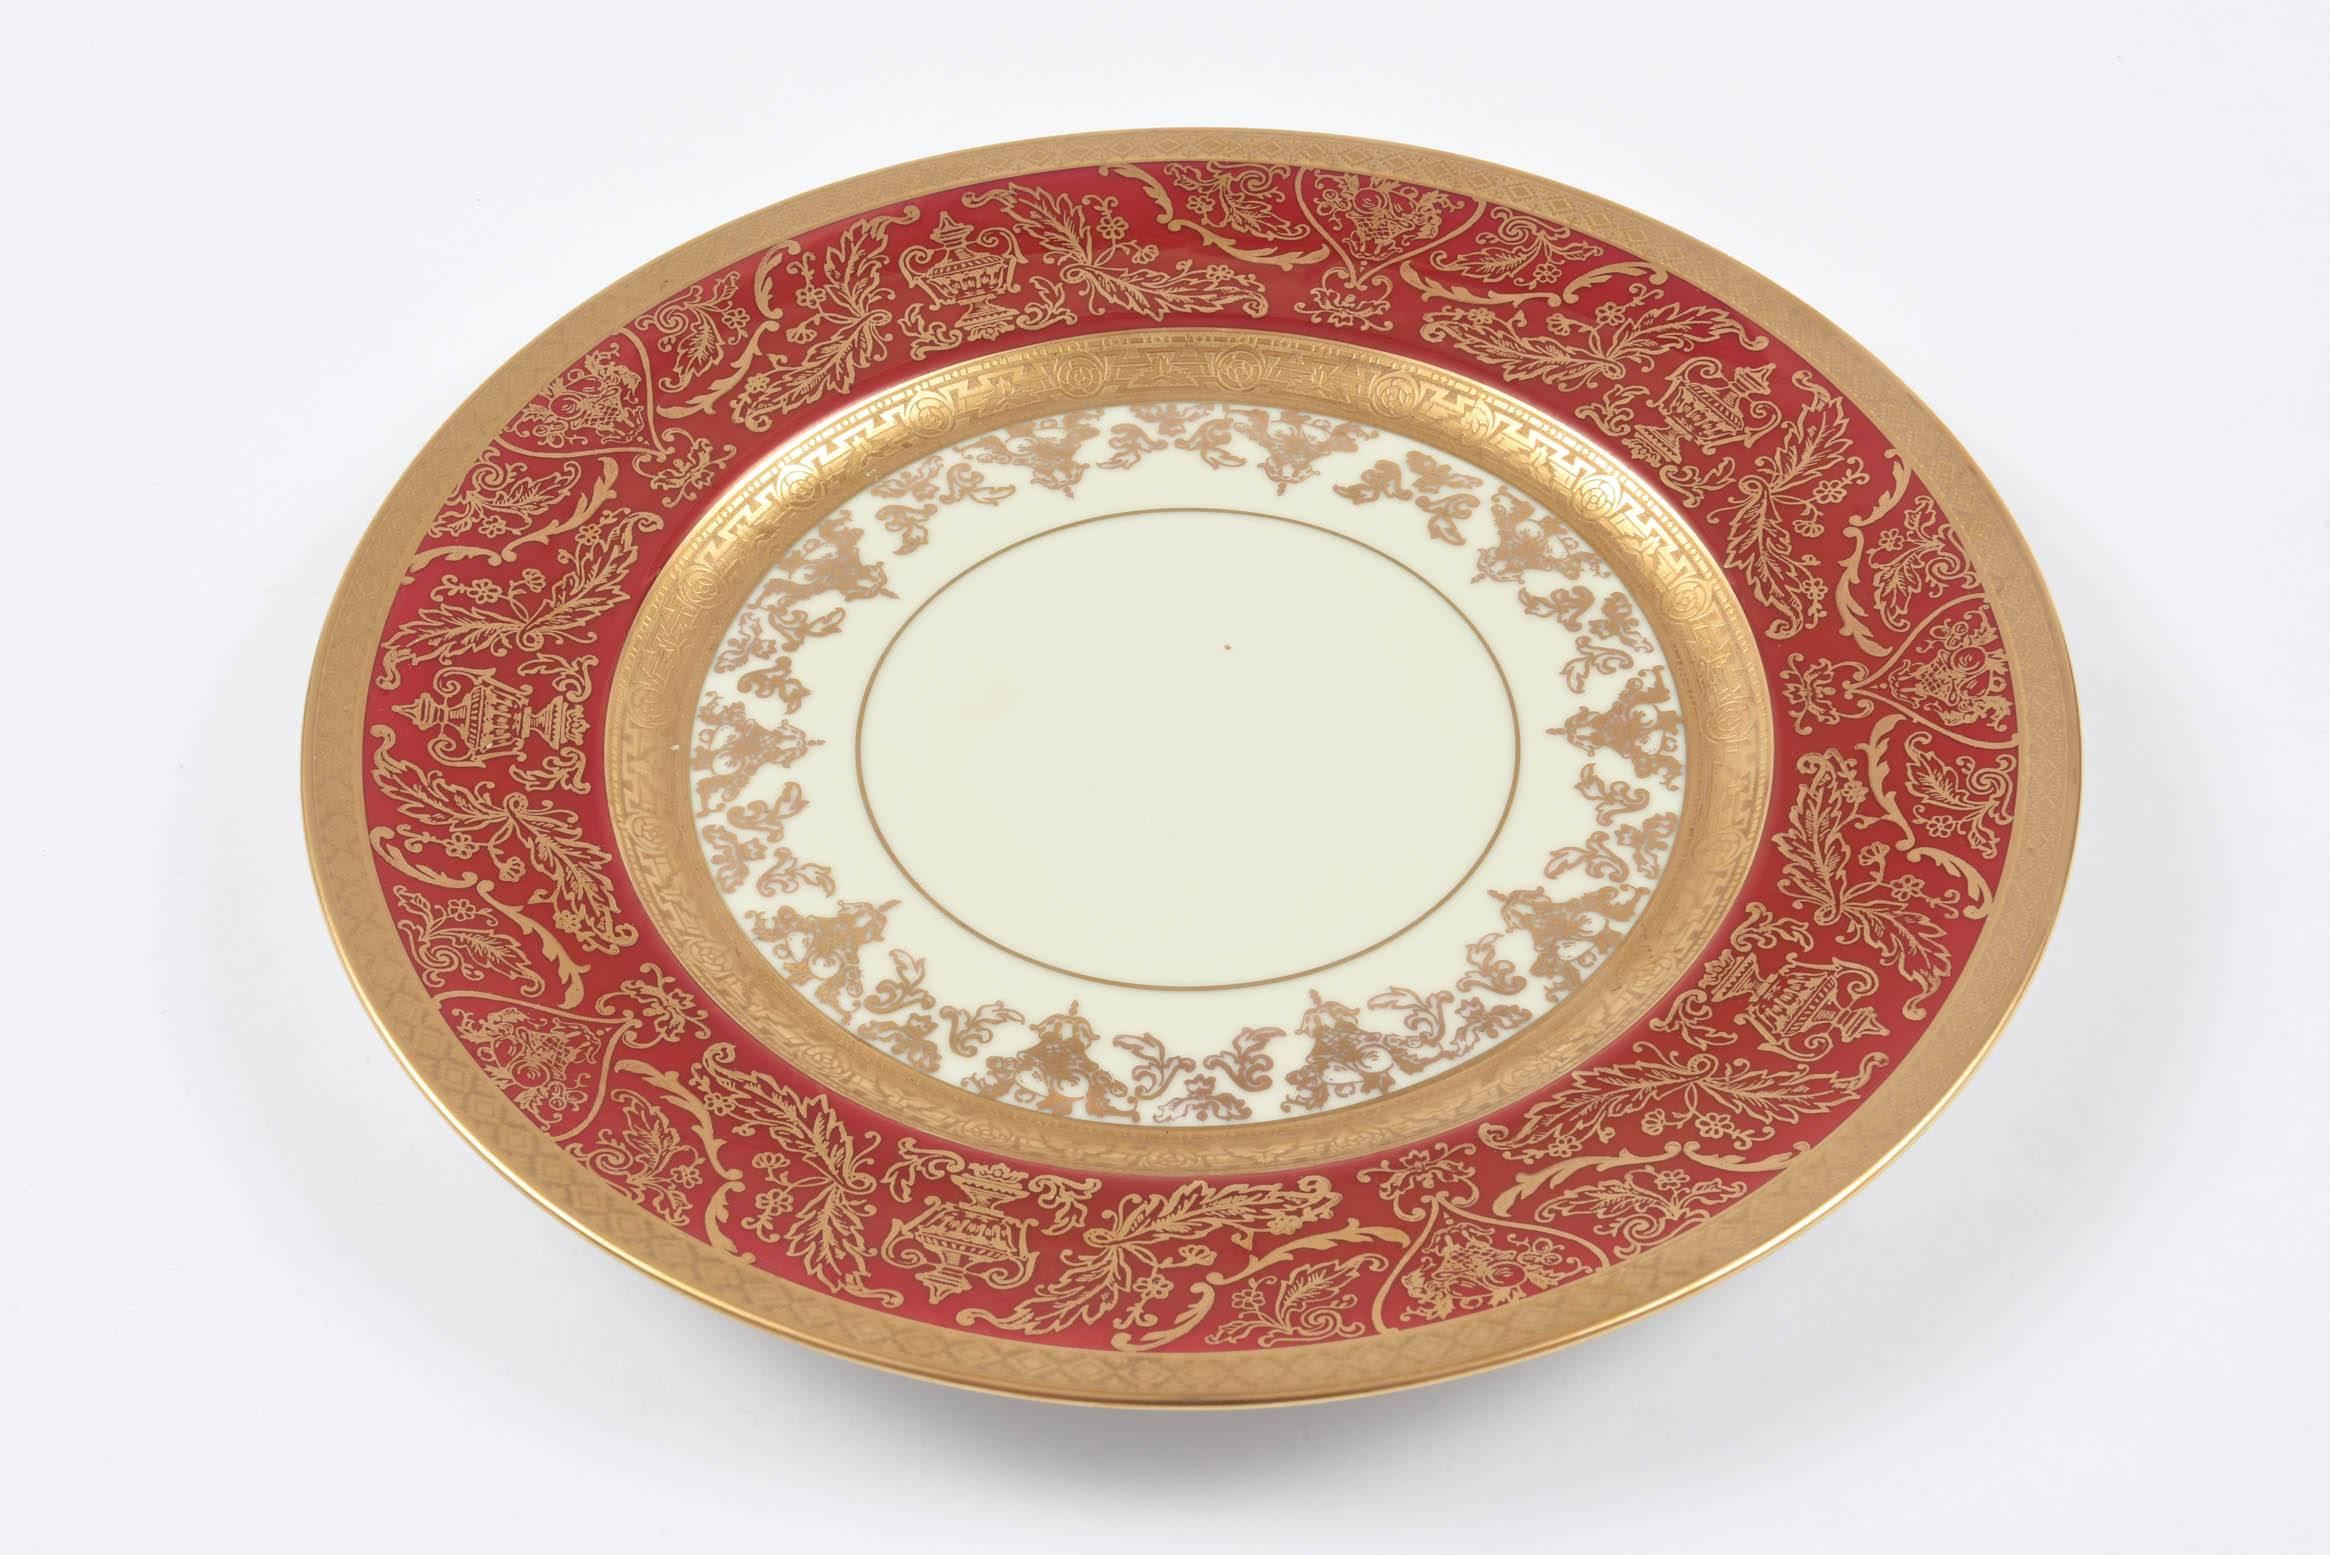 A great set of gilt decorated plates done by the American firm of Pickard who perfected the 24-karat acid etched gold technique in the 1920s. These plates are decorated by Pickard on a German produced blank by Heinrich & Co. Stunning gilt foliate